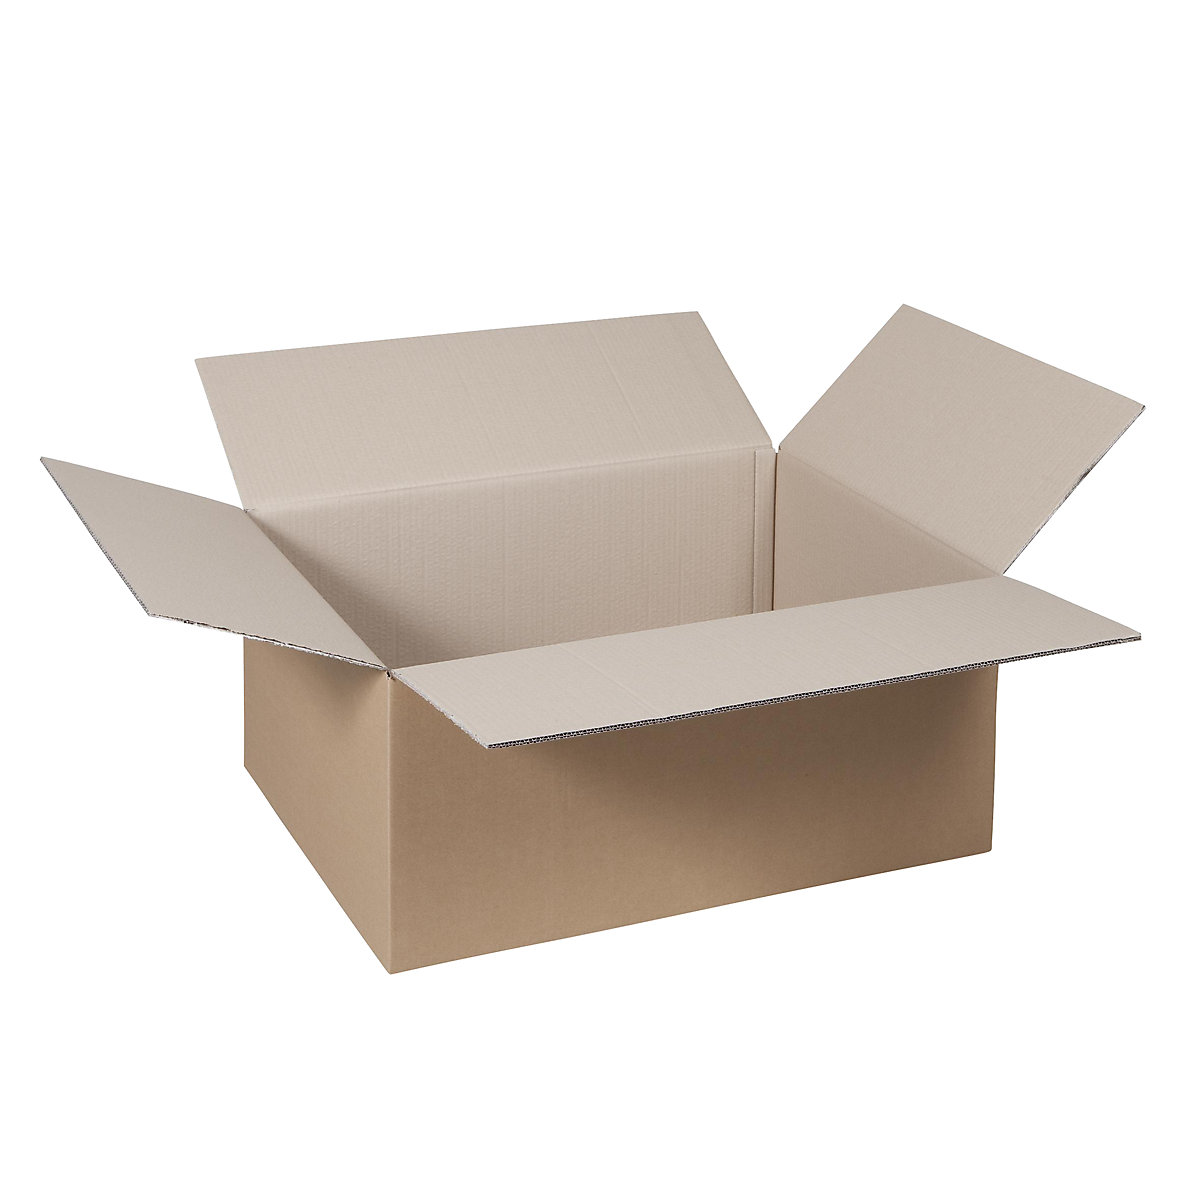 Folding cardboard box, FEFCO 0201, made of double fluted cardboard, internal dimensions 315 x 220 x 90 mm, pack of 50-47